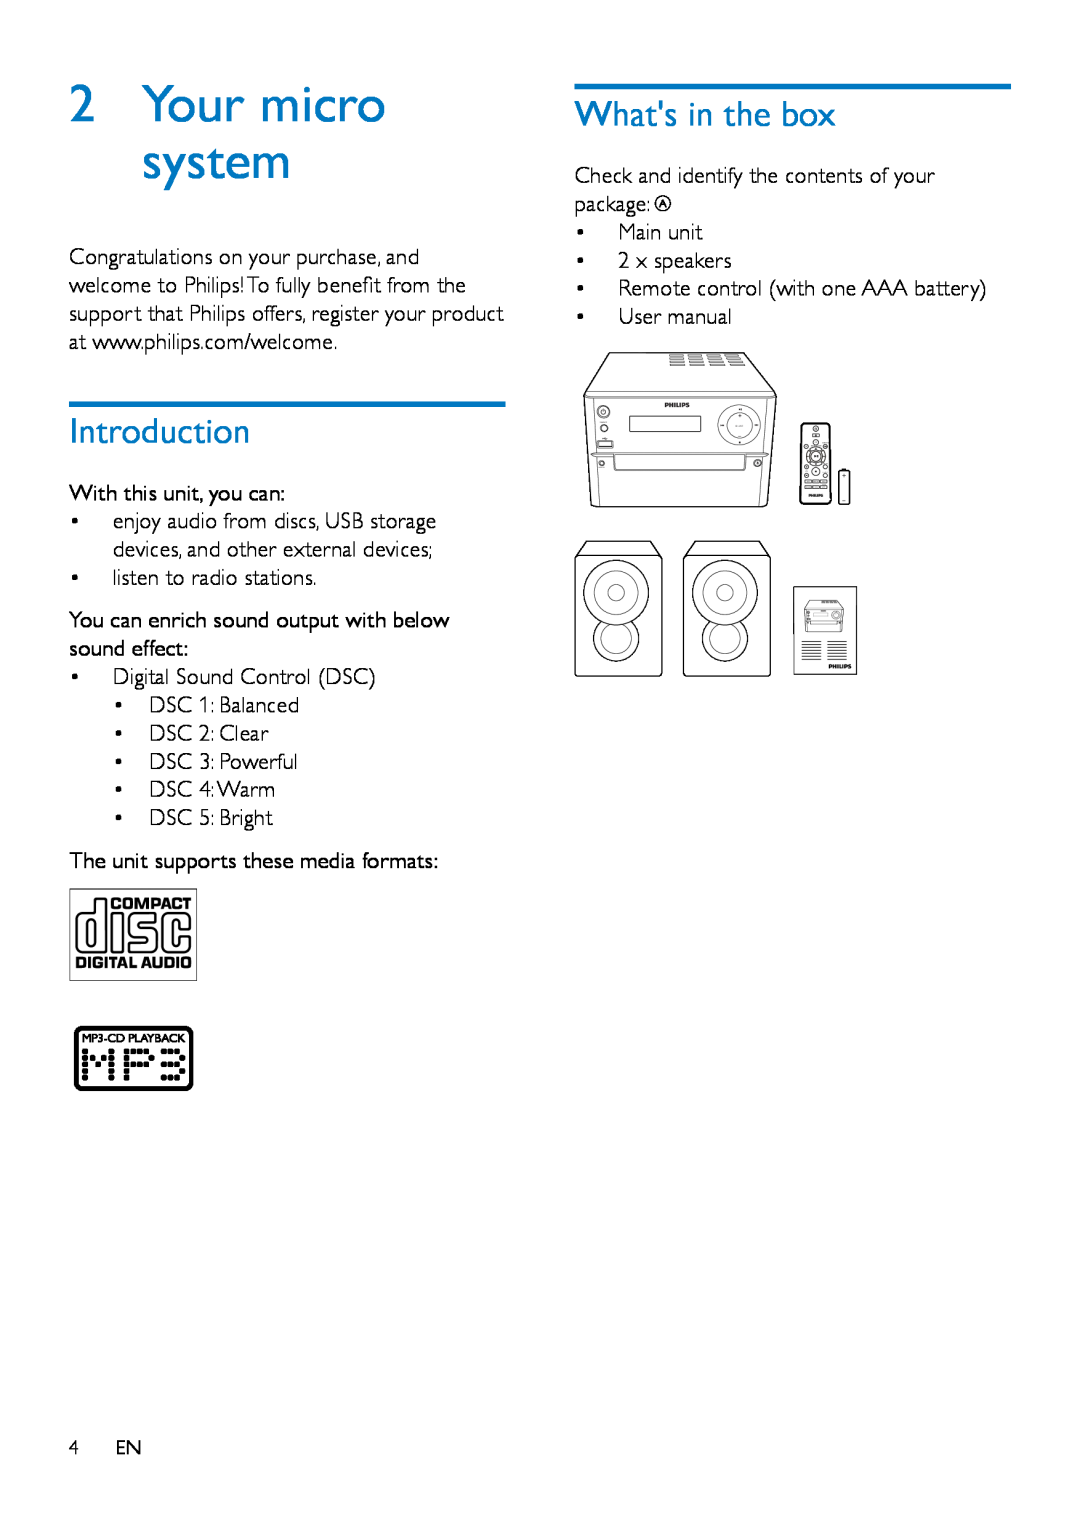 Philips MCM2150 user manual Introduction, Whats in the box, Your micro system 